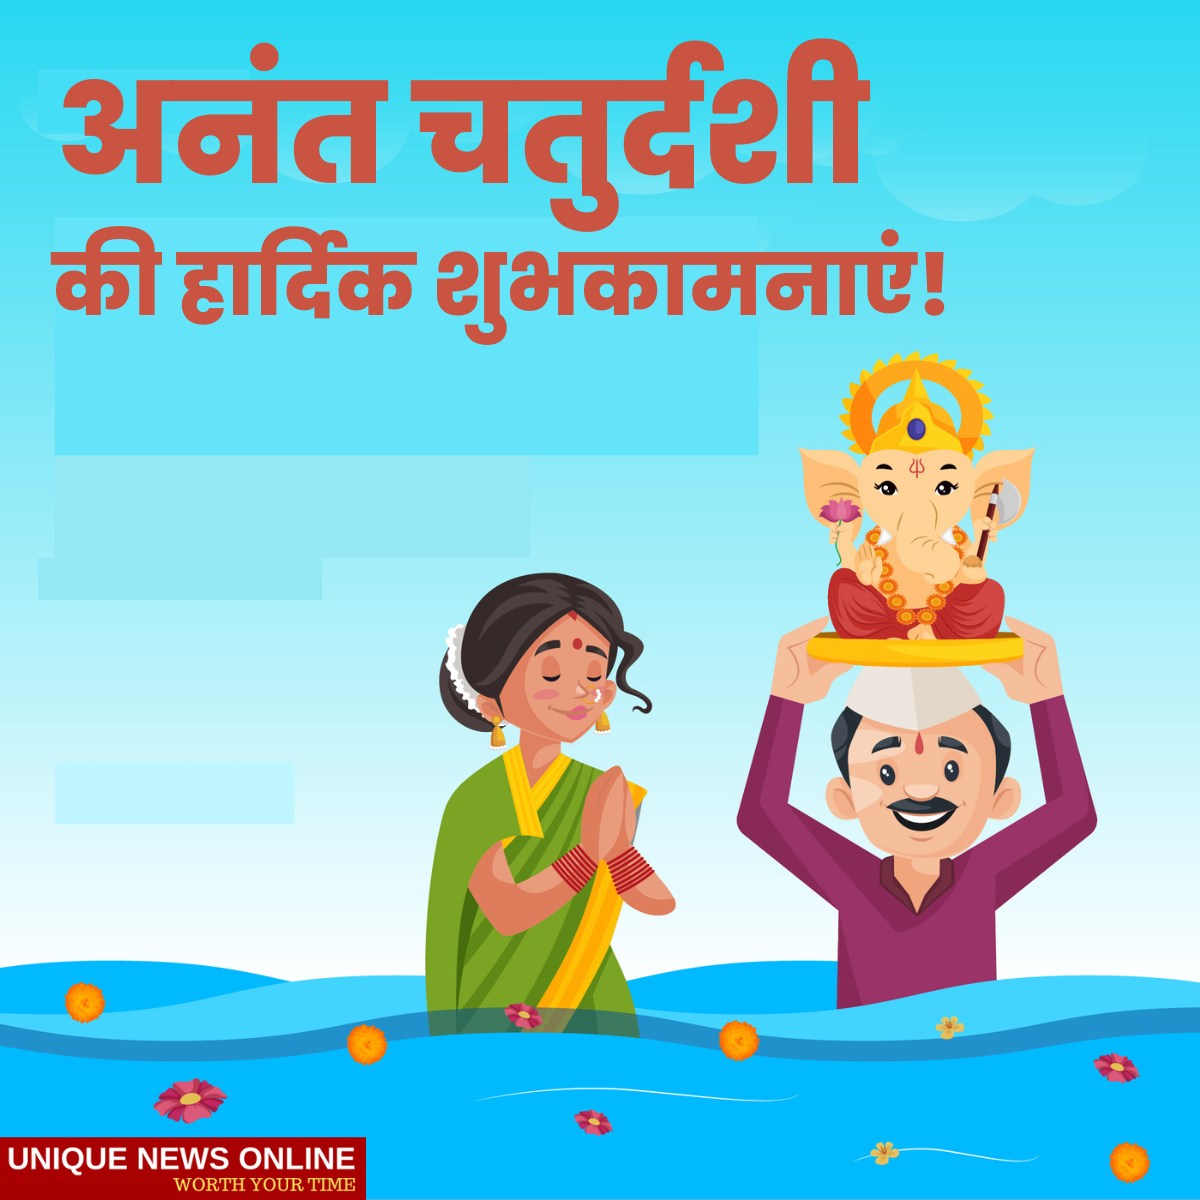 Happy Anant Chaturdashi 2022: Hindi Quotes, Wishes, Greetings, Images, and Messages